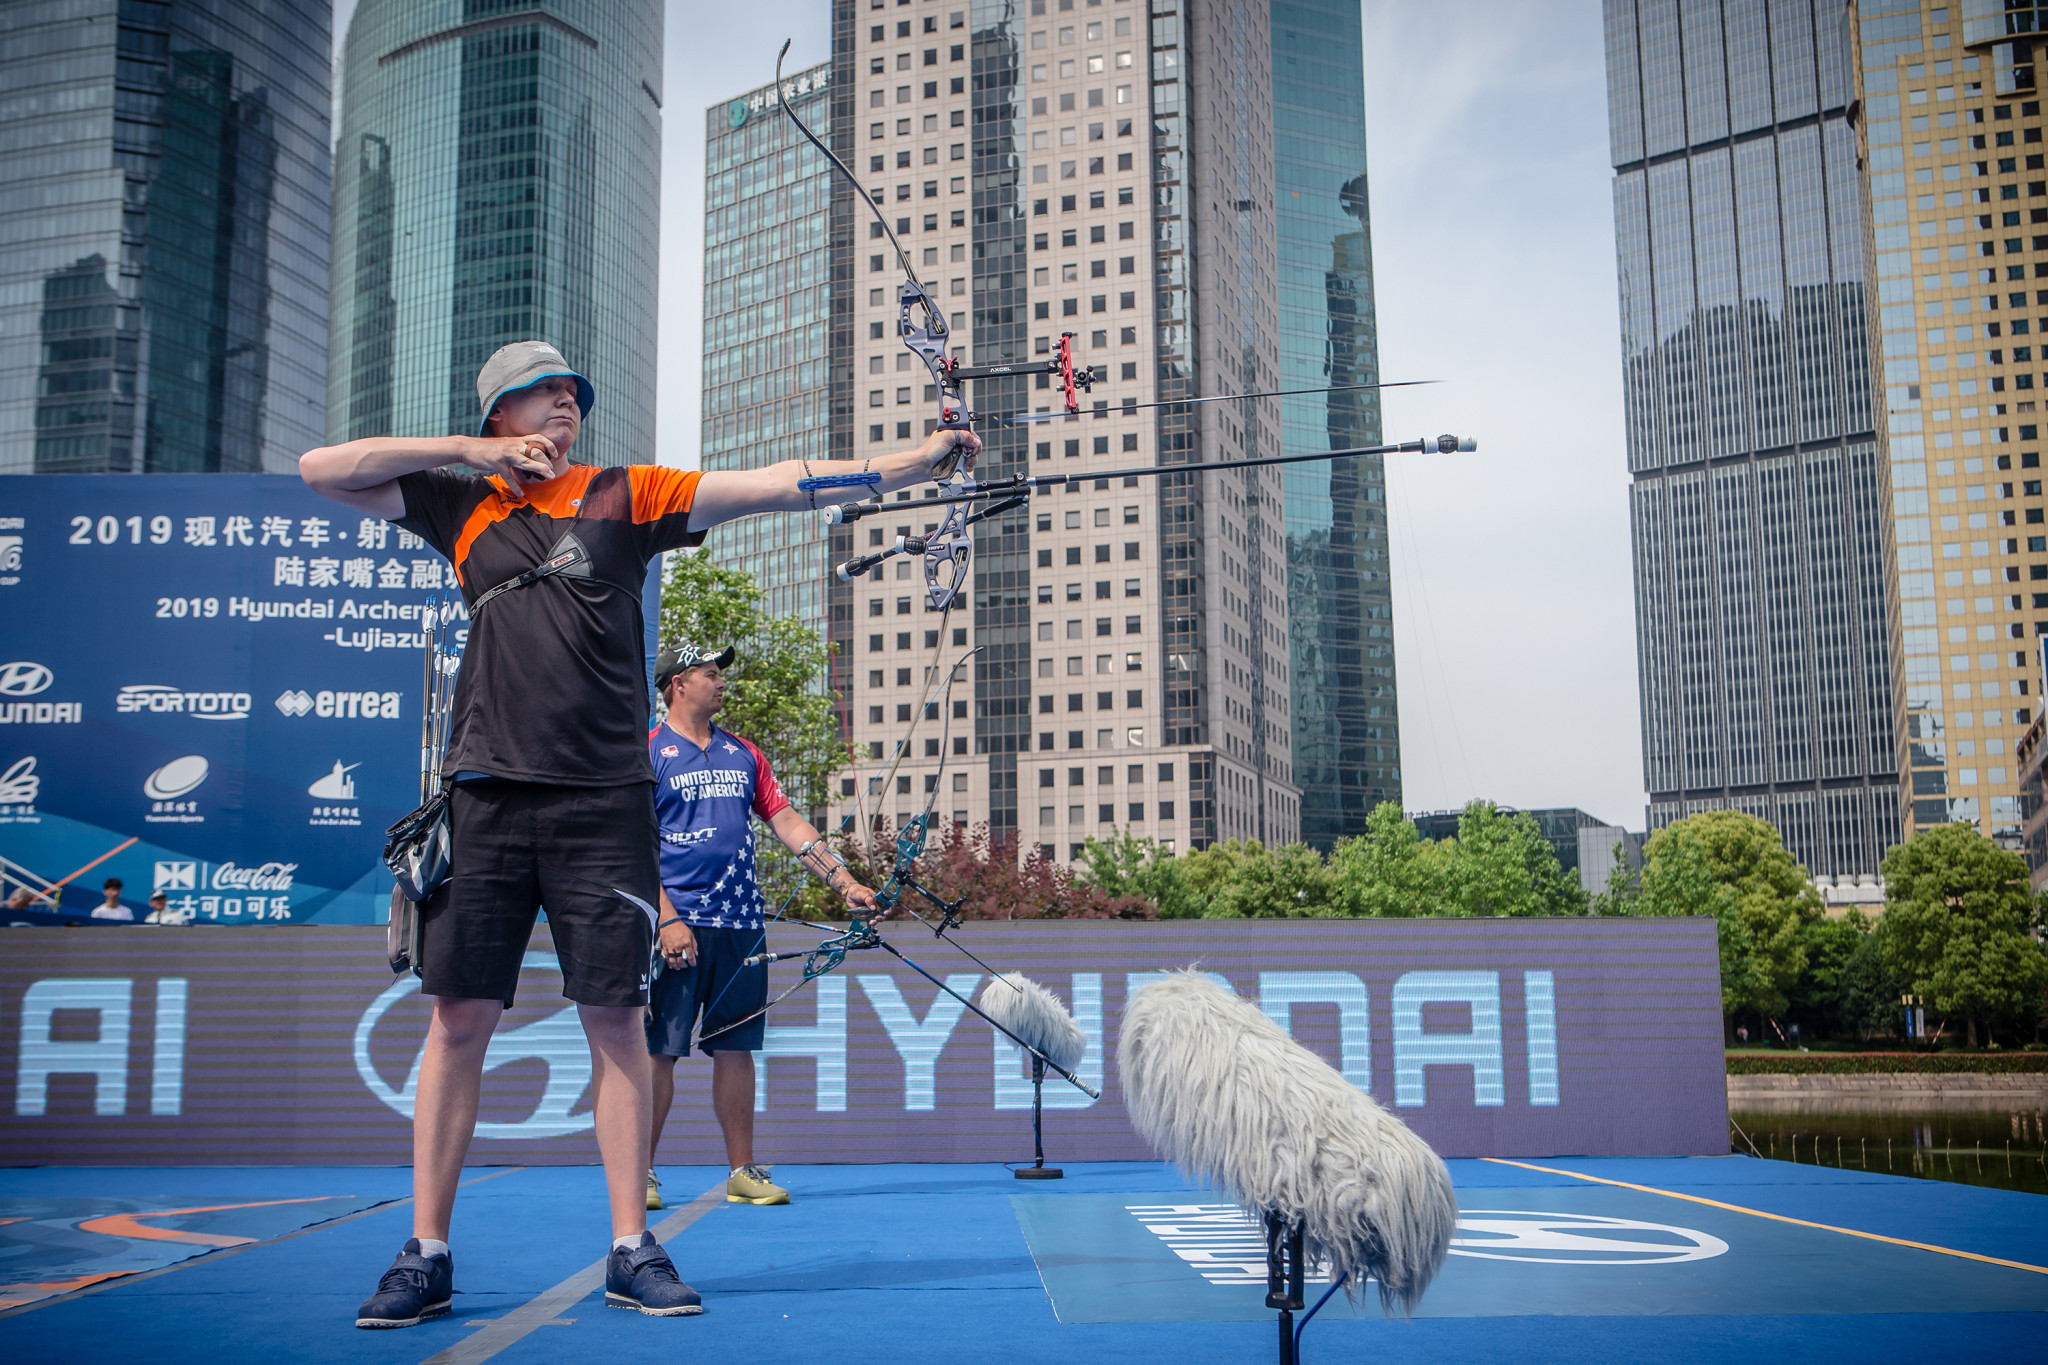 Shanghai to host Archery World Cup Final instead of stage due to coronavirus